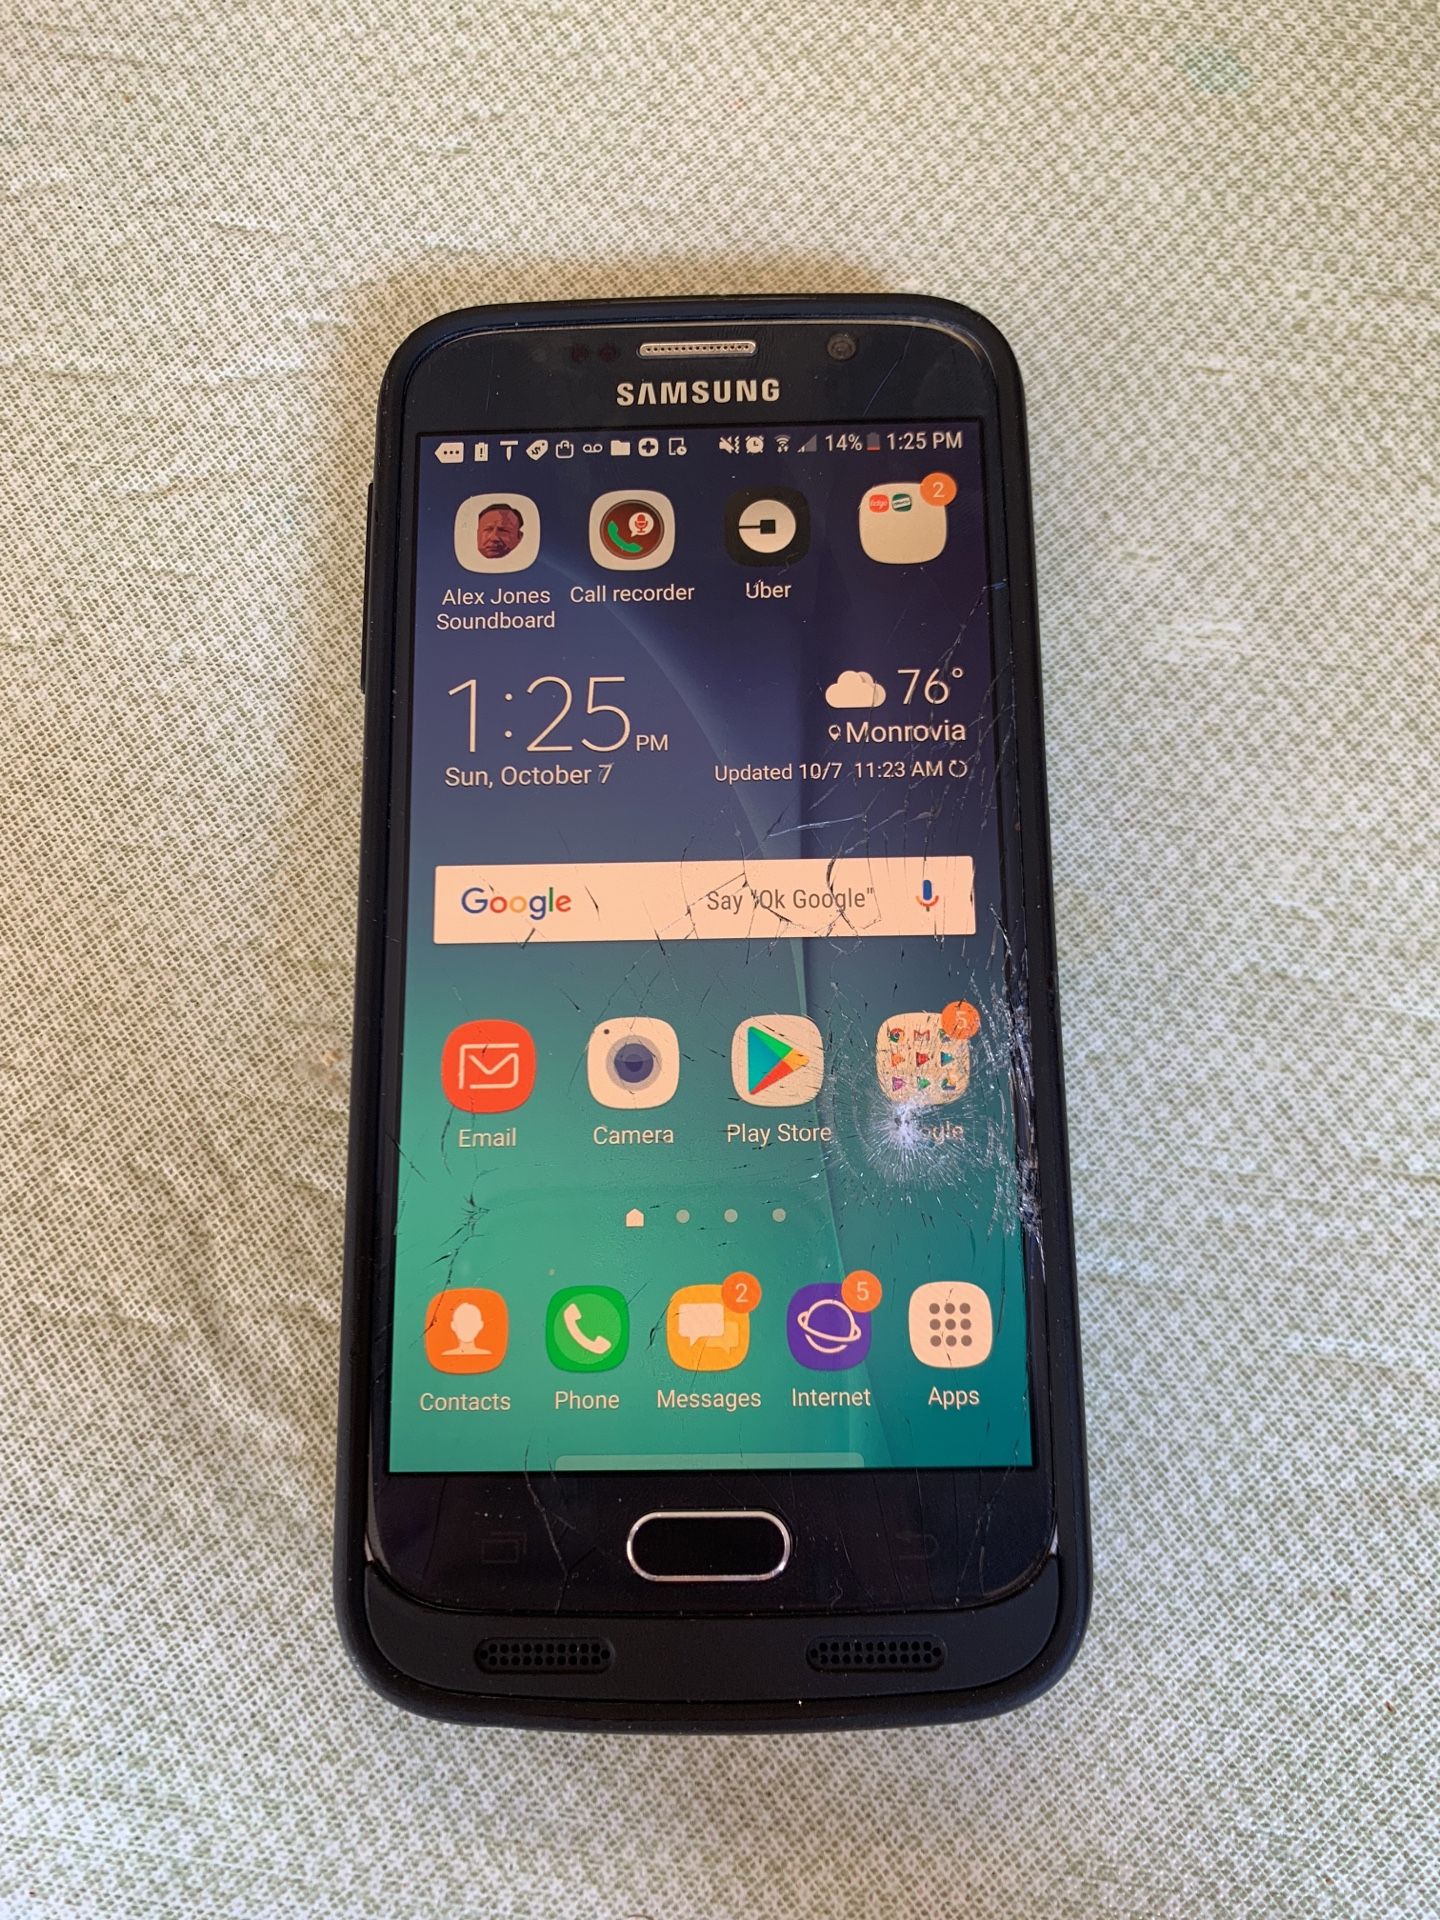 Samsung galaxy S6 + Charging Phone Case - works great, just cracked